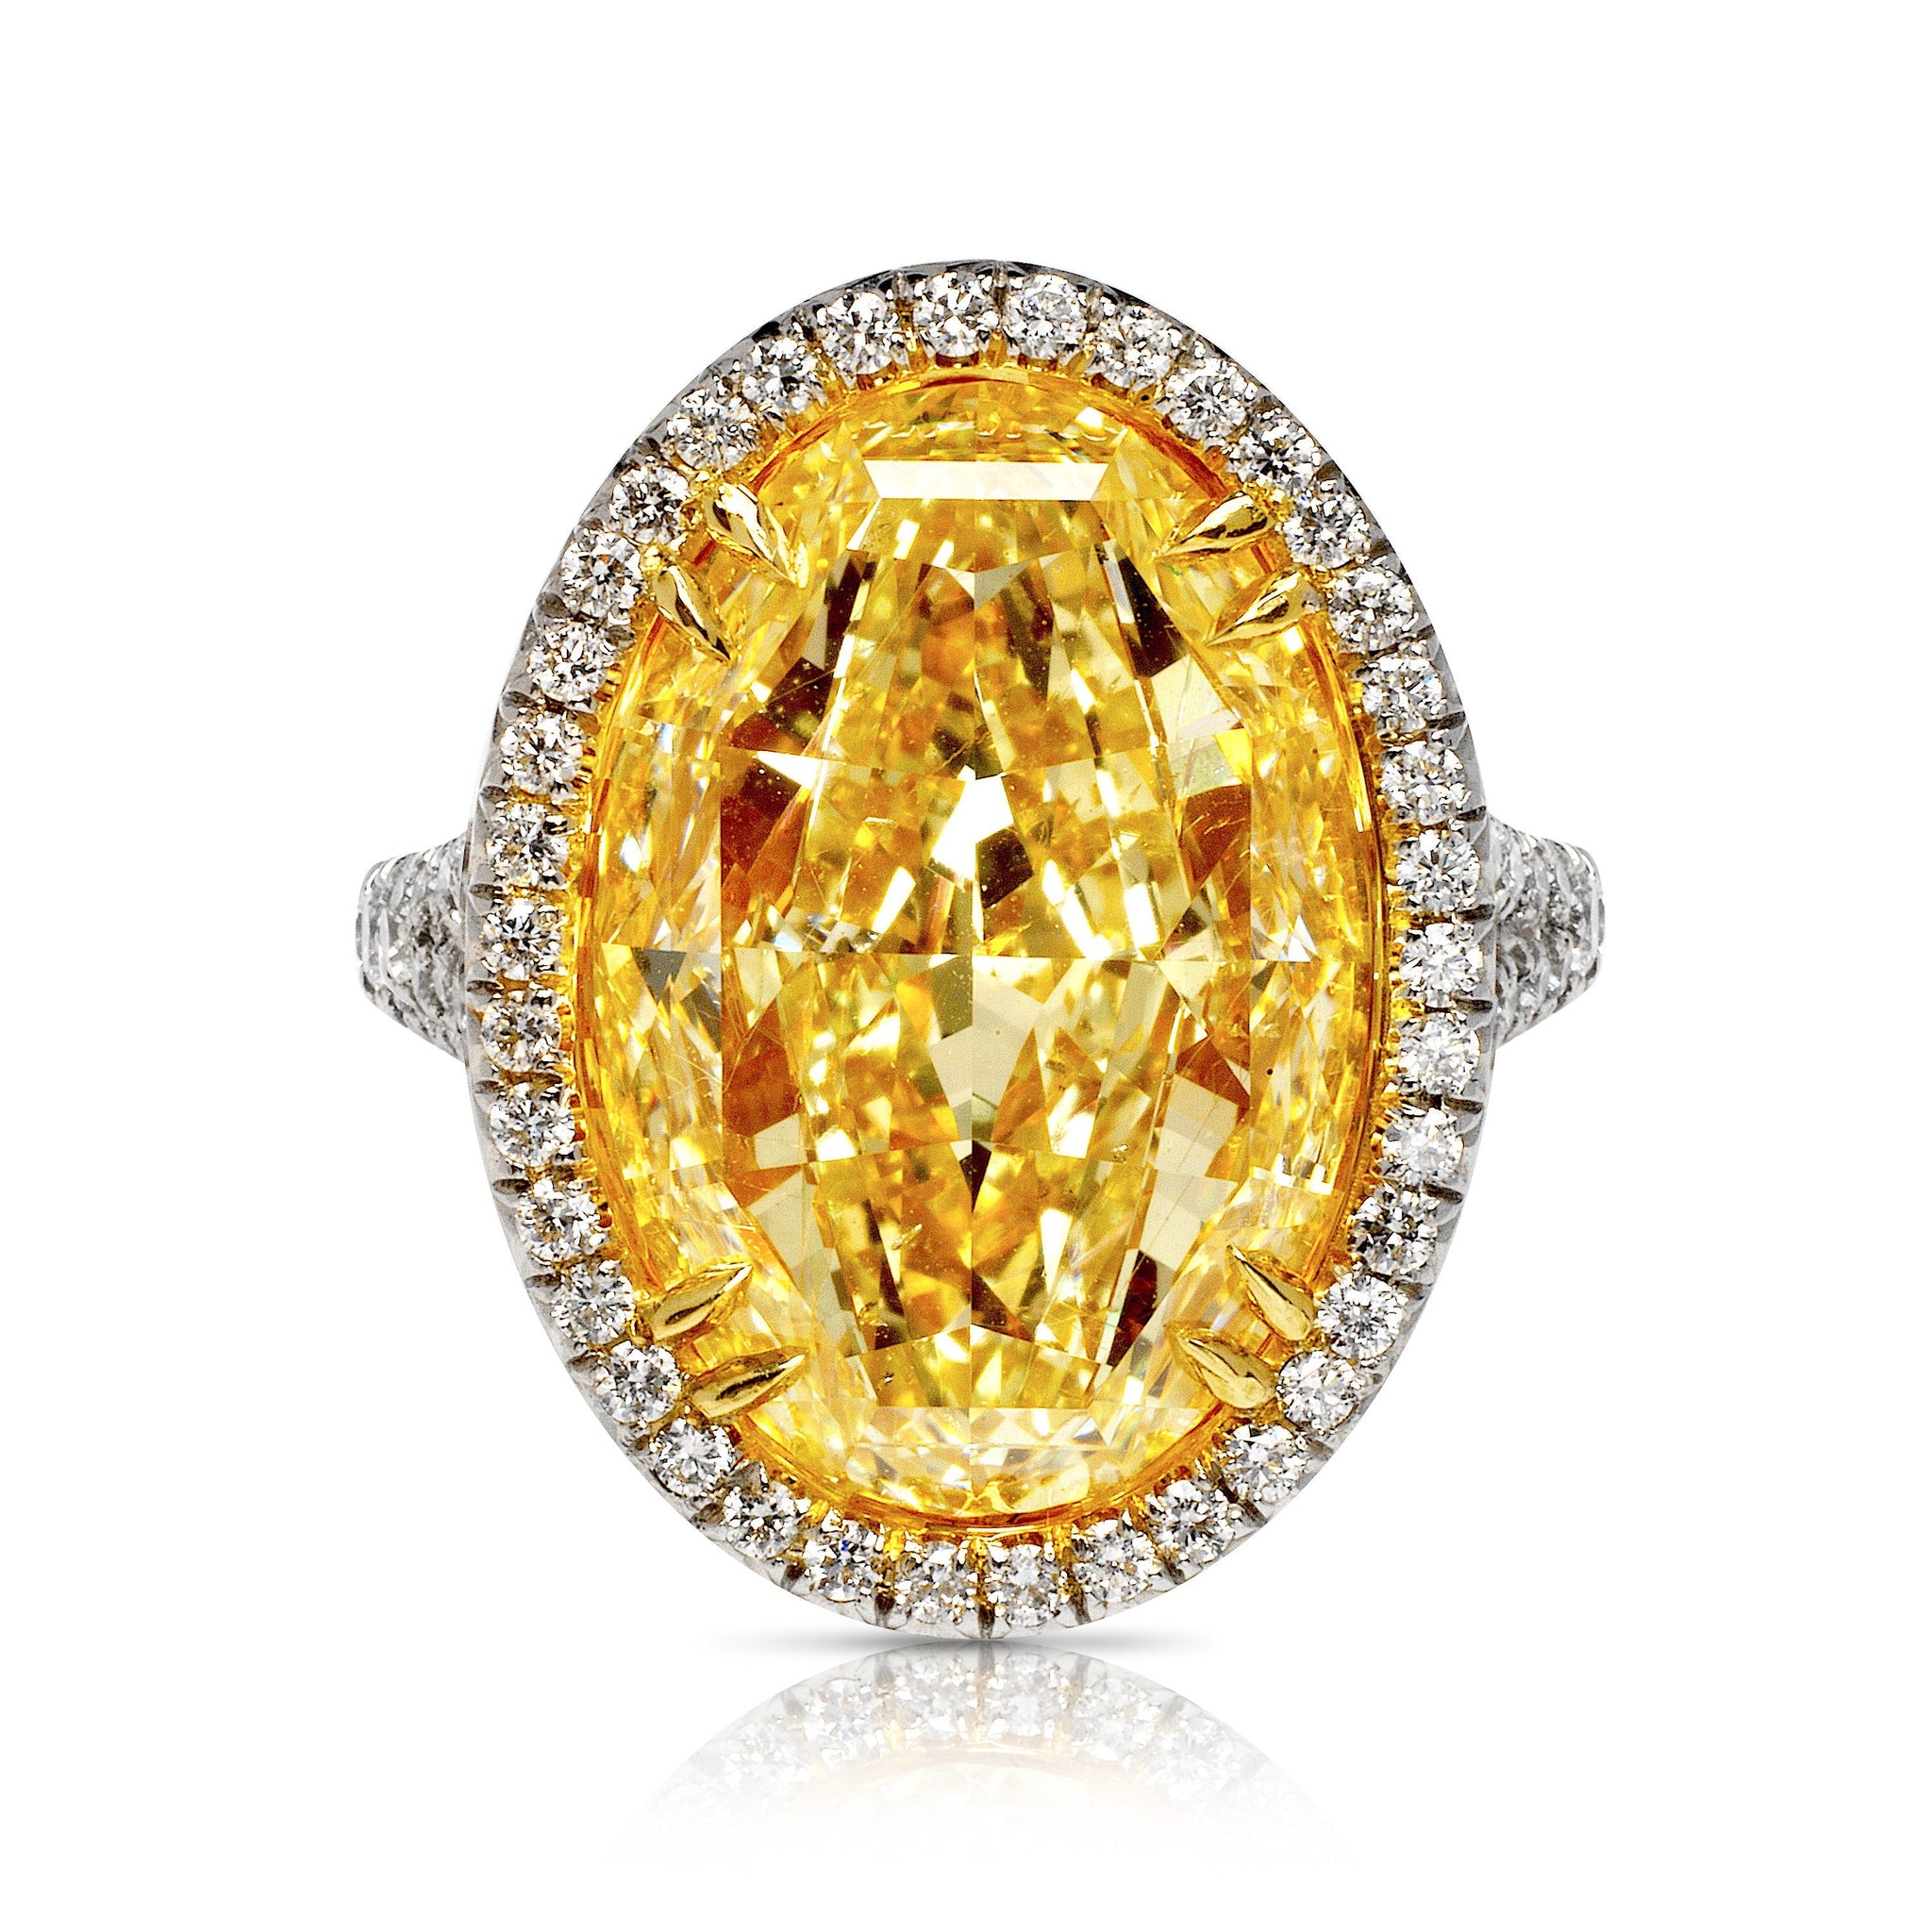 Fancy Yellow Diamond Ring Oval Cut 13 Carat Halo Ring in Platinum & 18K Gold Front View